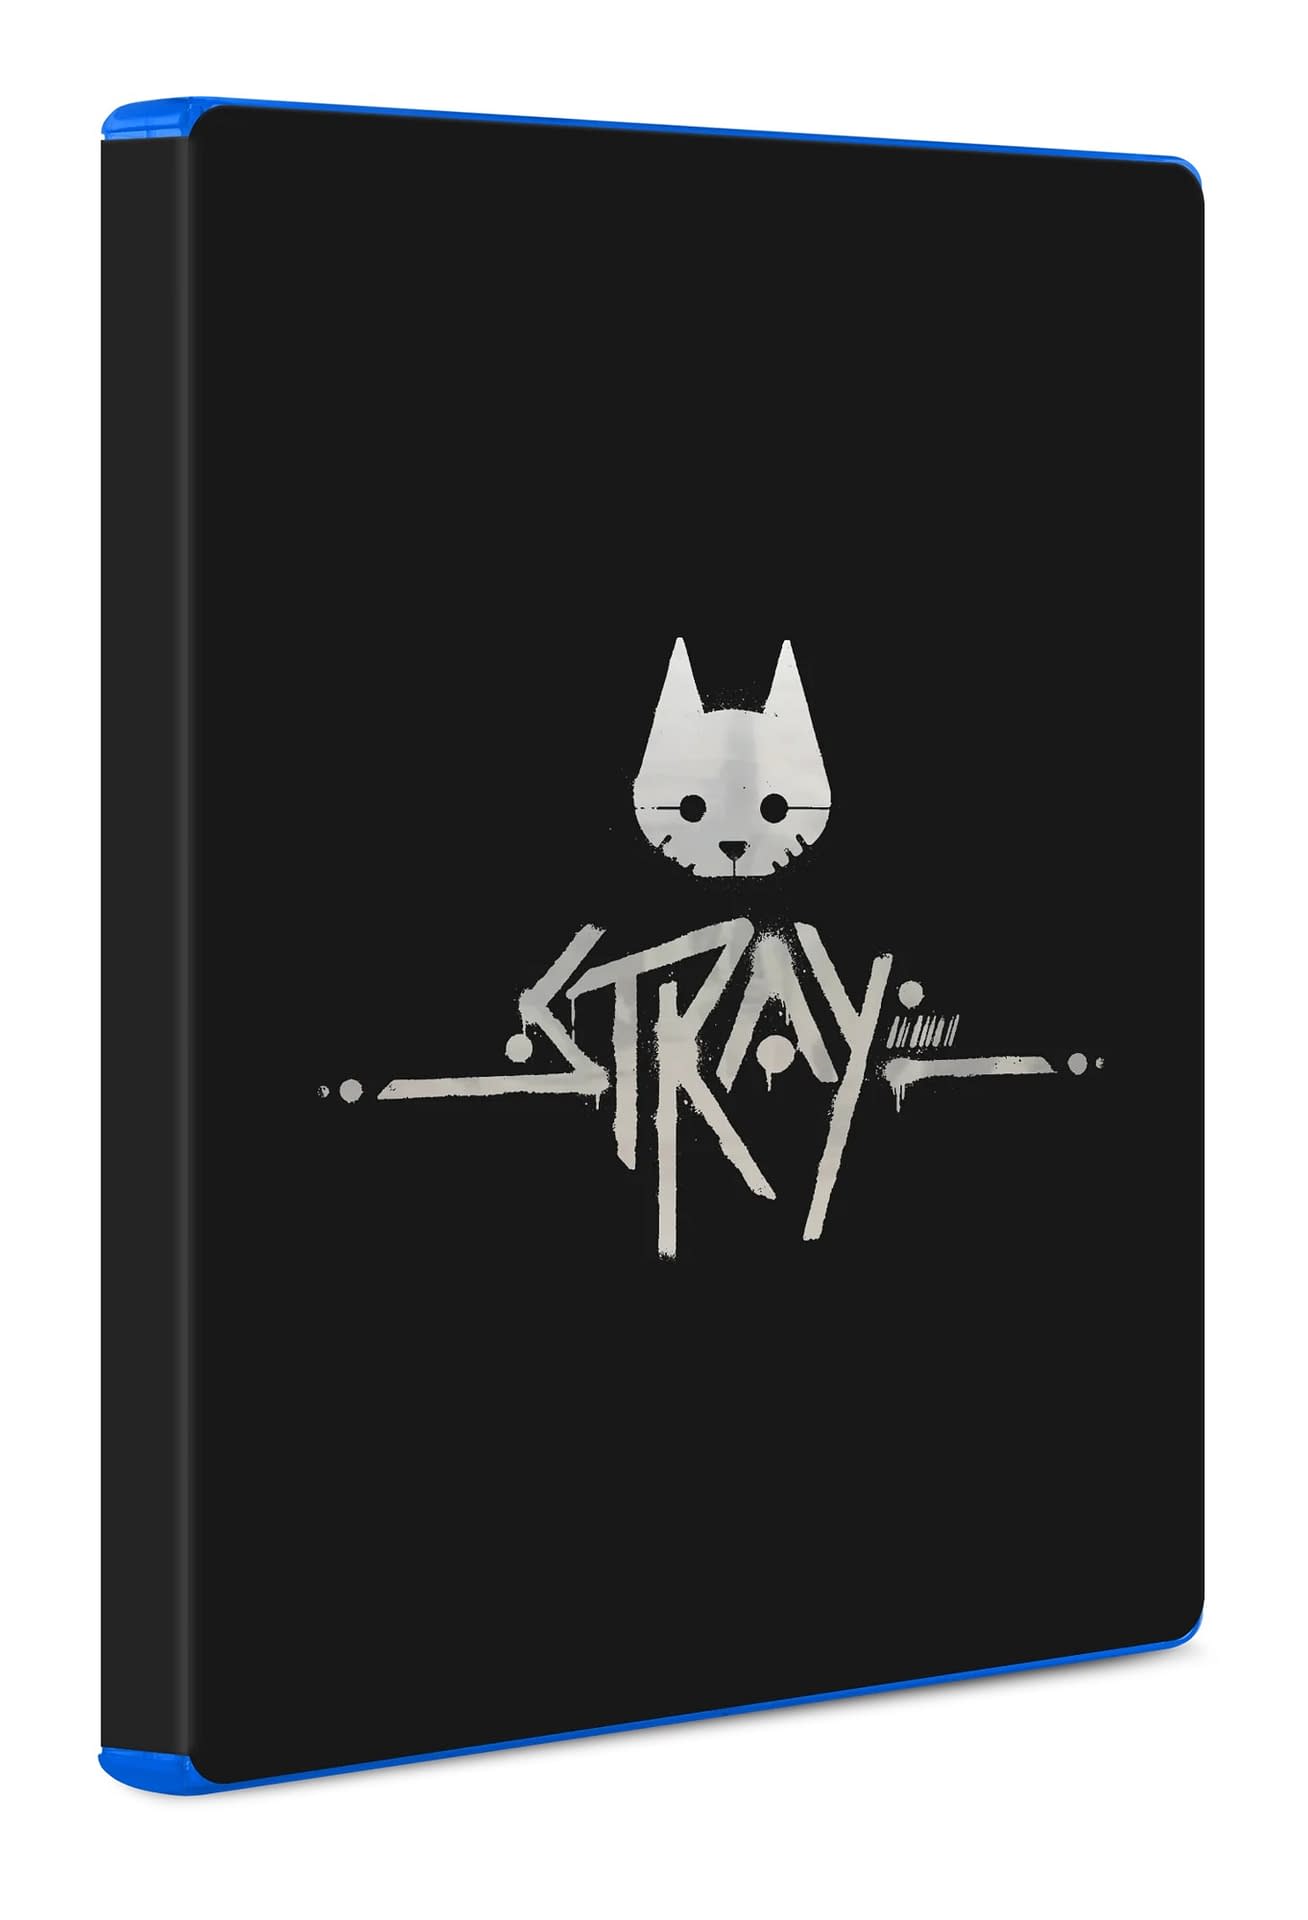 Live Edition Physical Now & Soundtrack Pre-Orders Vinyl Stray For Are